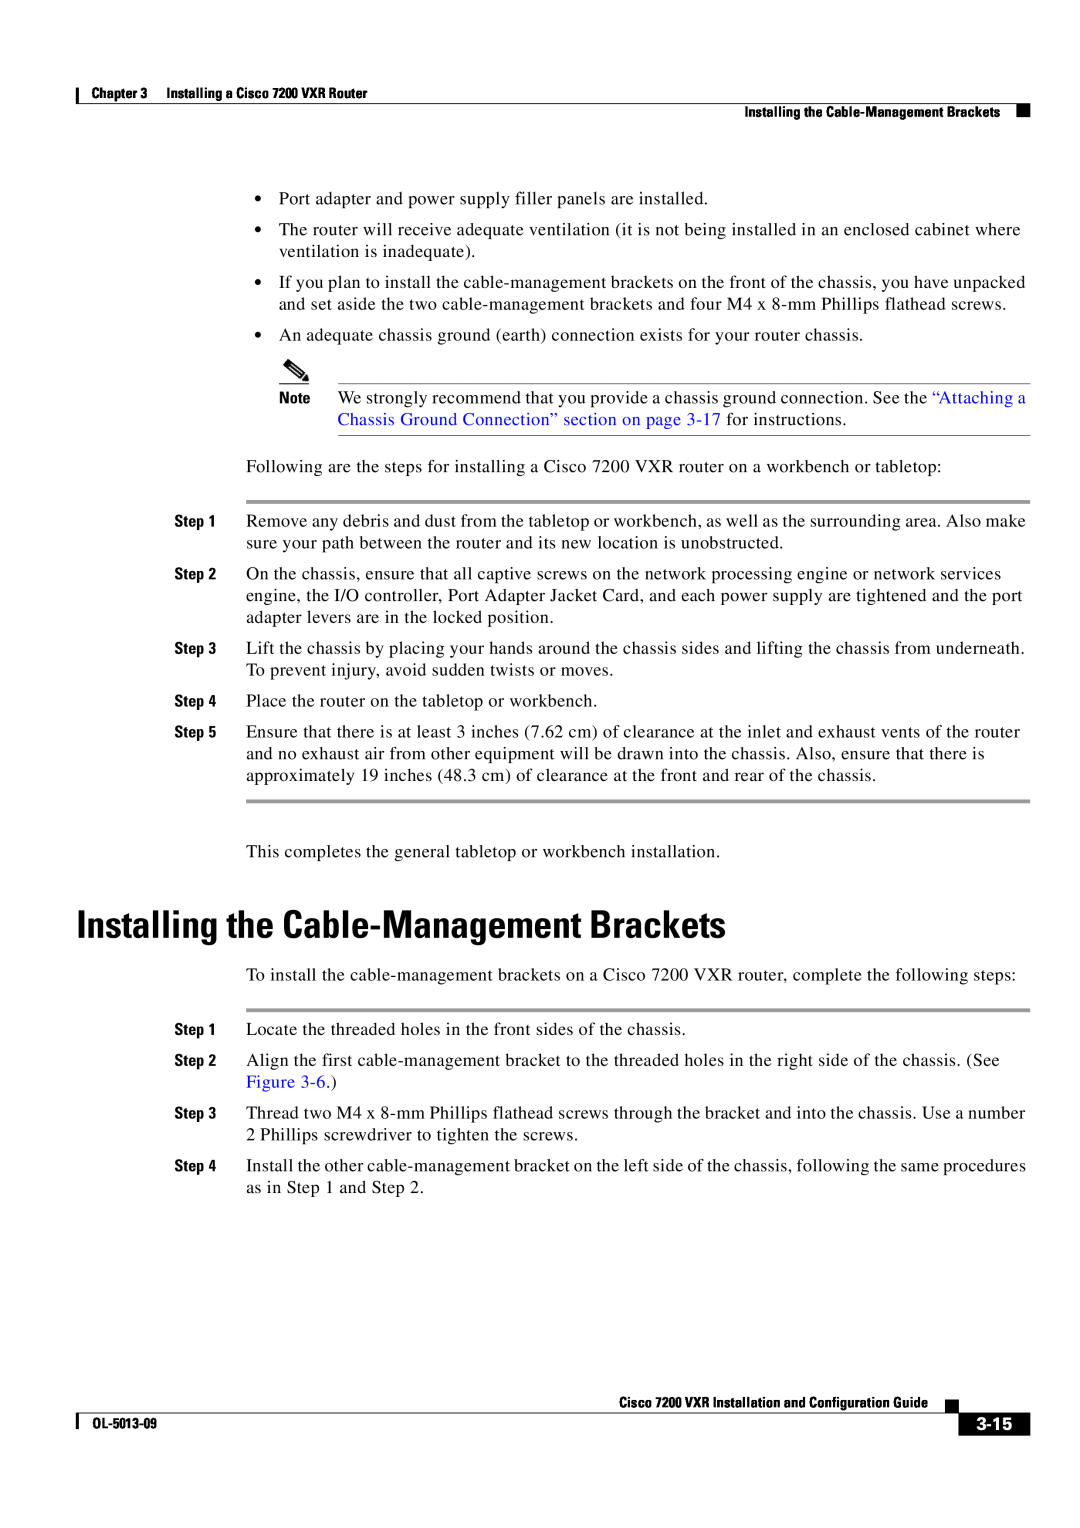 Cisco Systems 7200 VXR manual Installing the Cable-Management Brackets, 3-15 